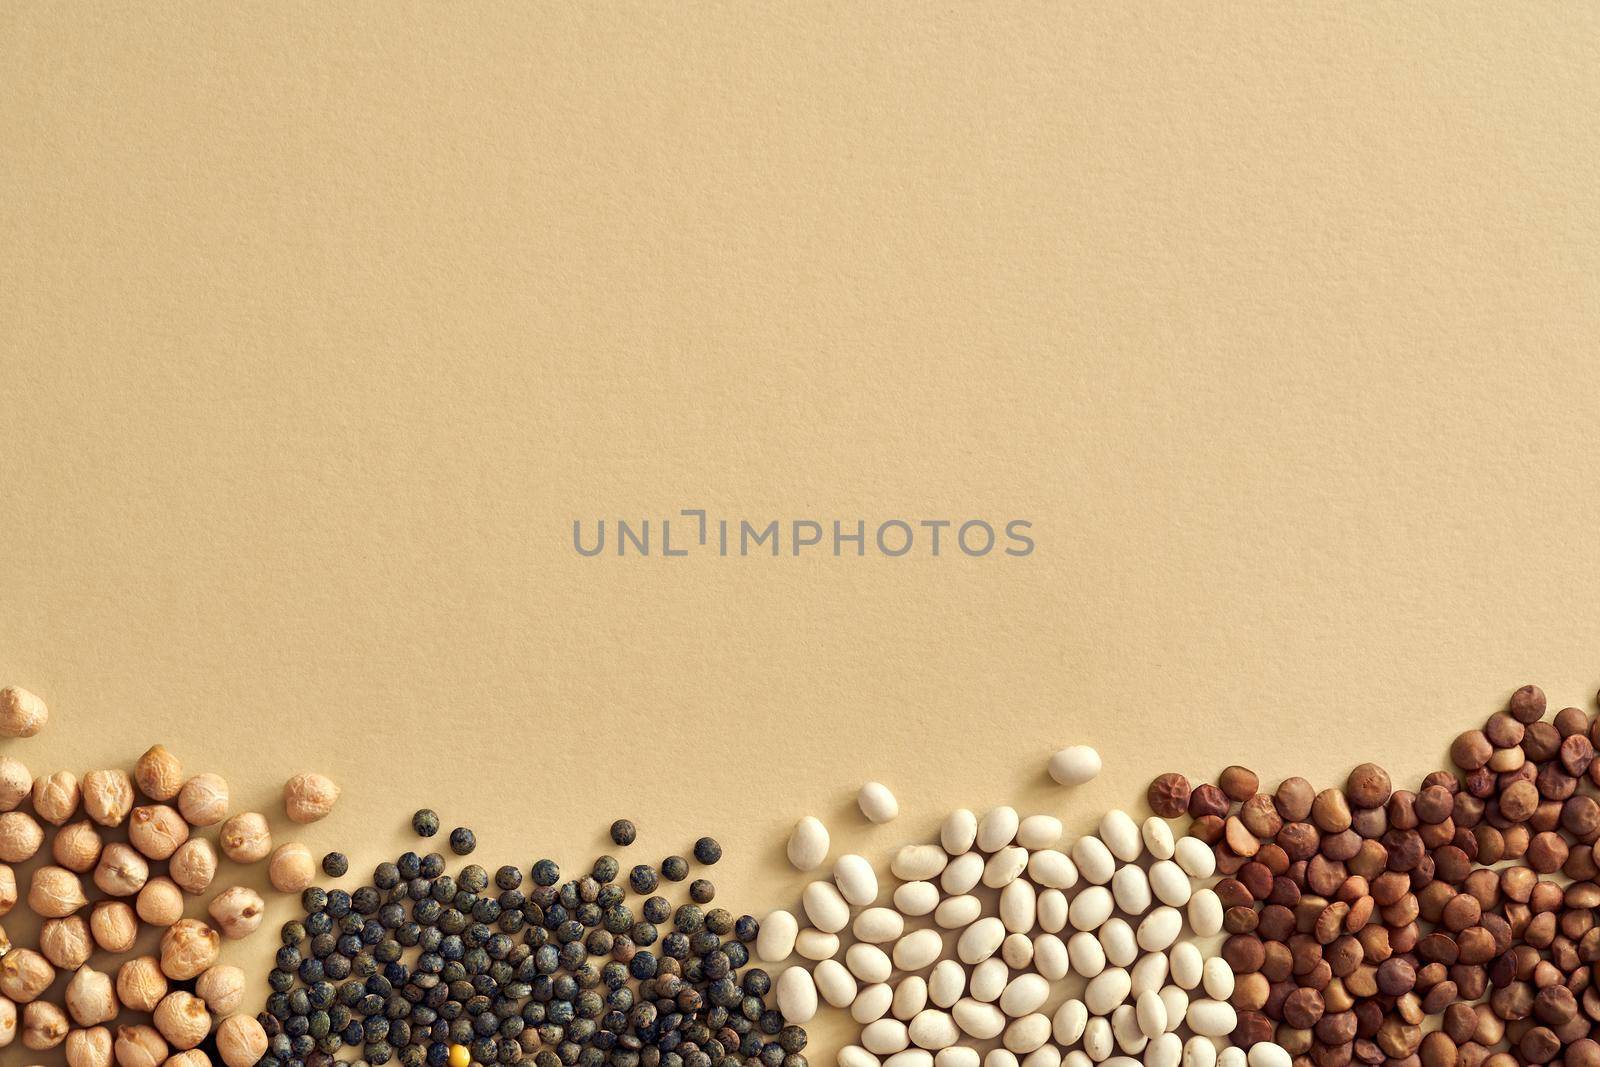 Chickpeas, beans and lentils - flat lay of legumes on beige background, with copy space by madeleine_steinbach